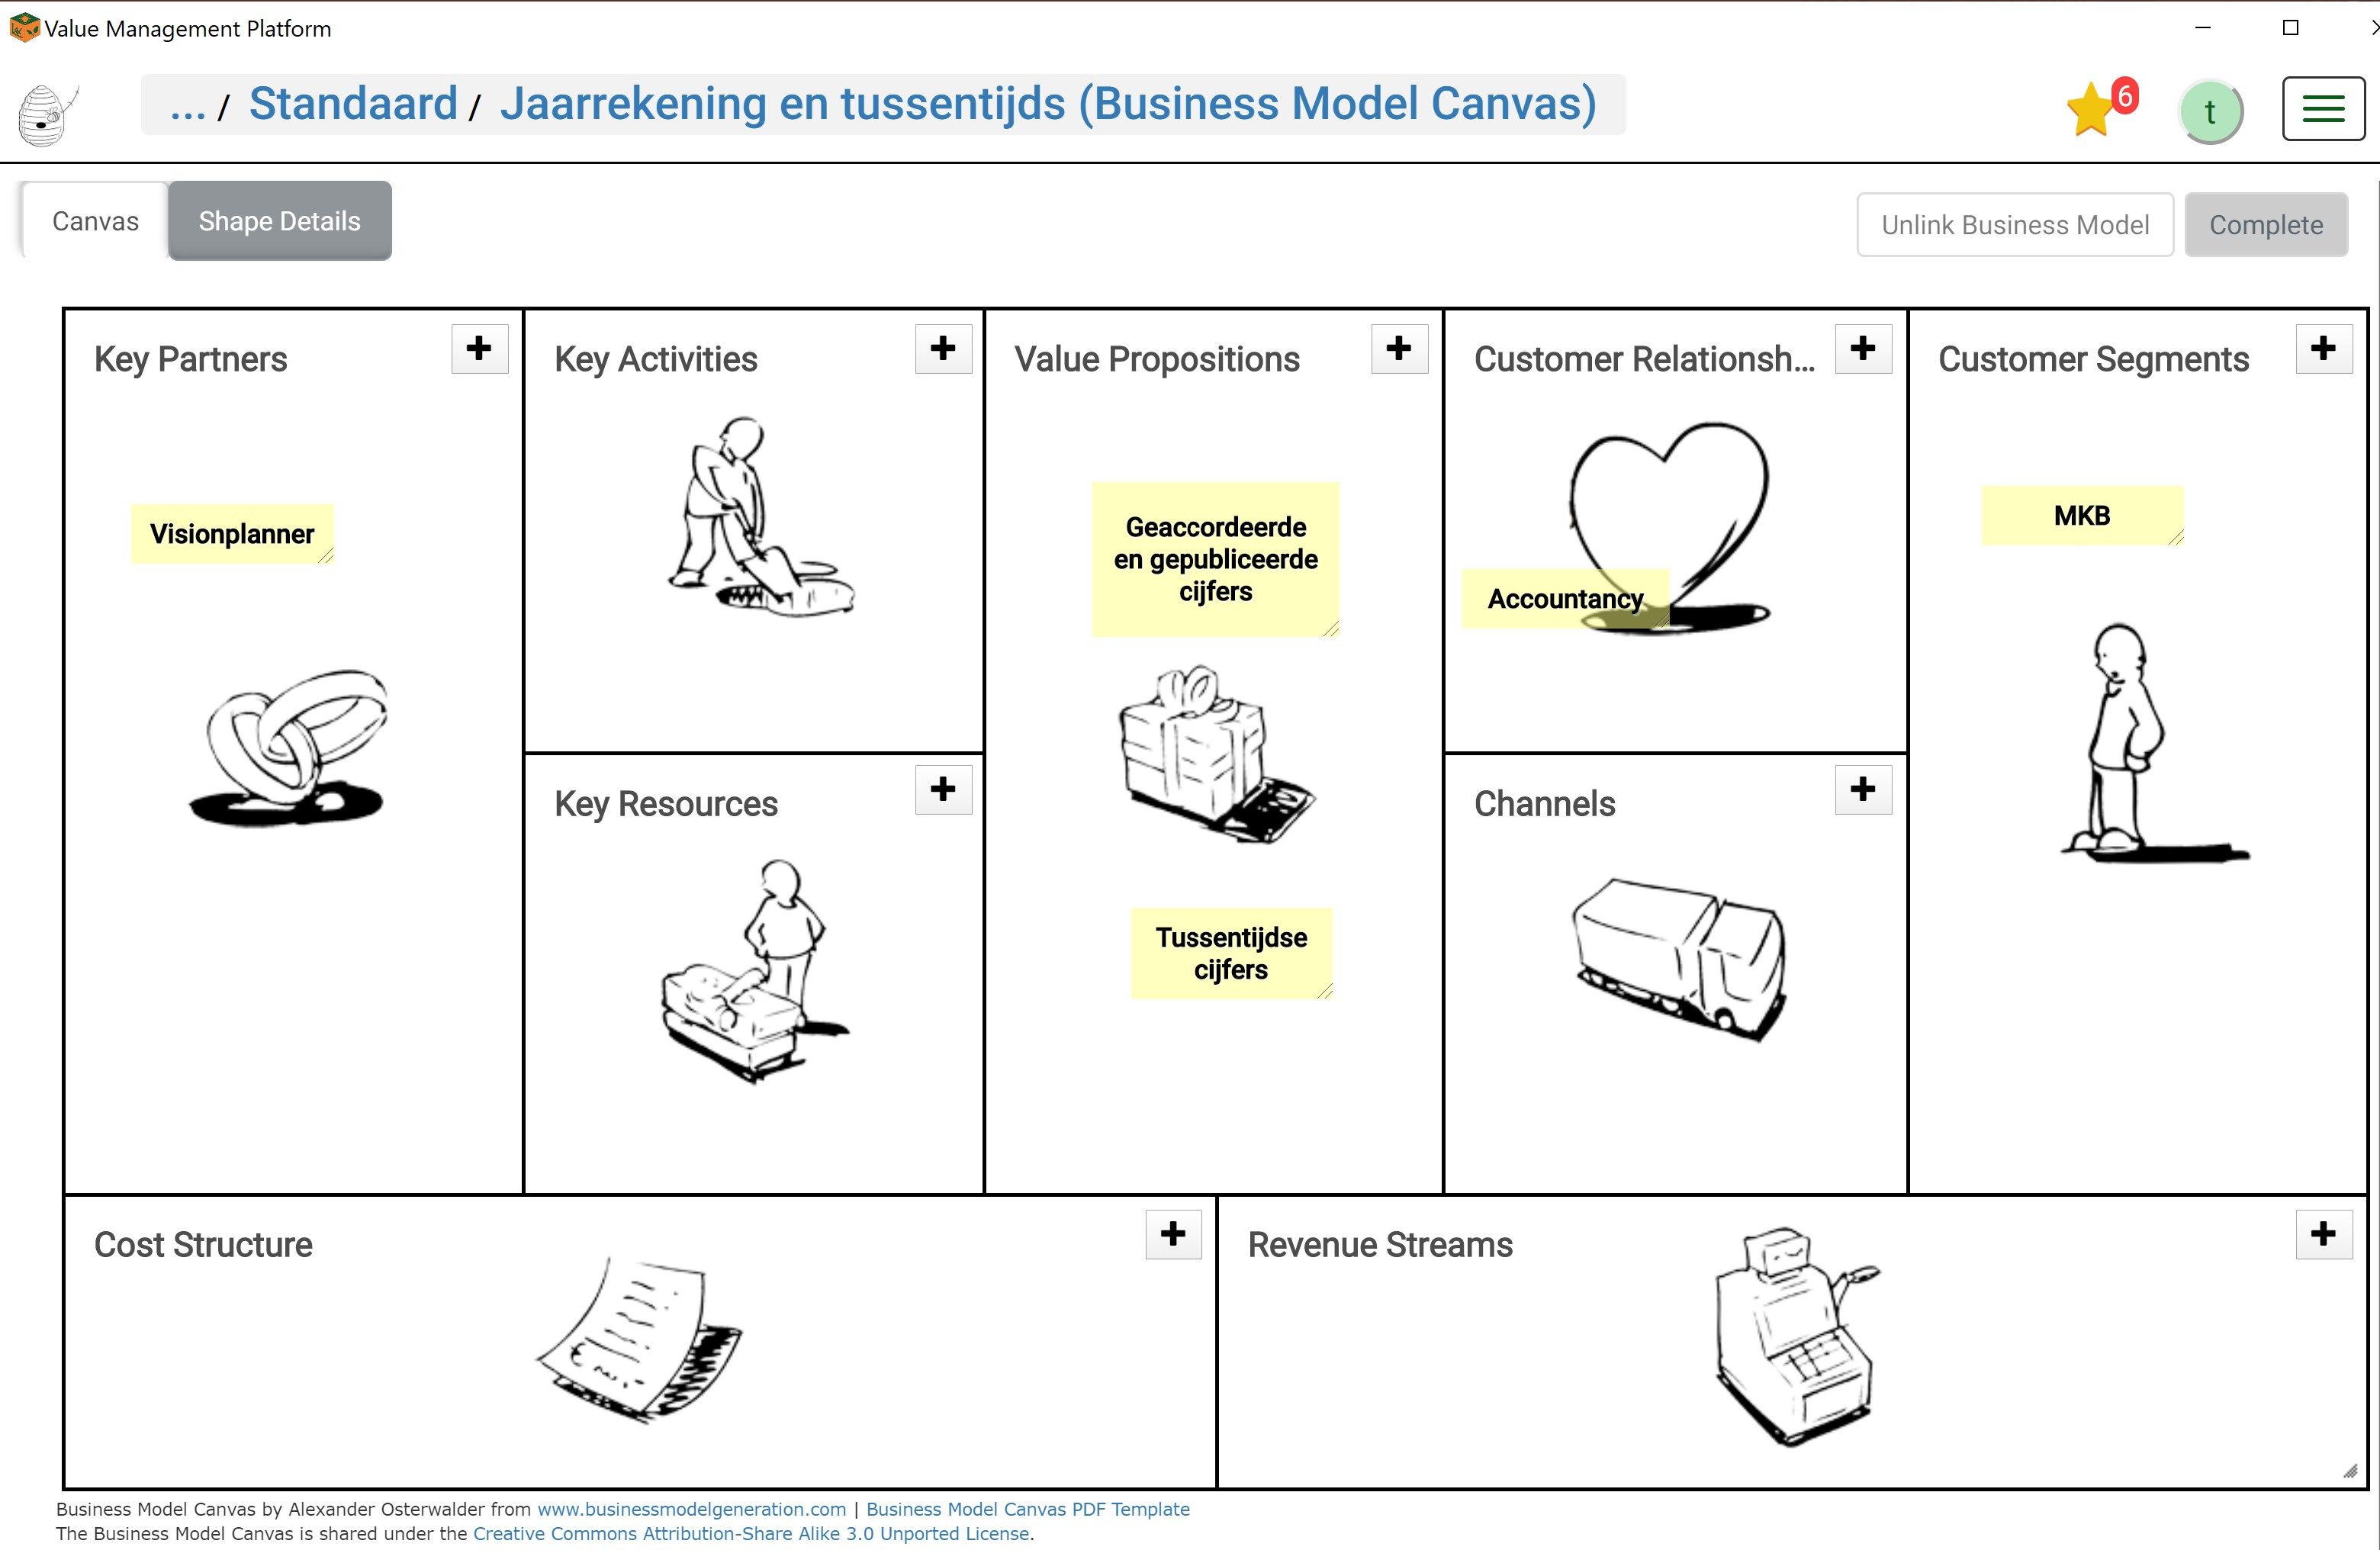 Simplified Accountancy business model canvas